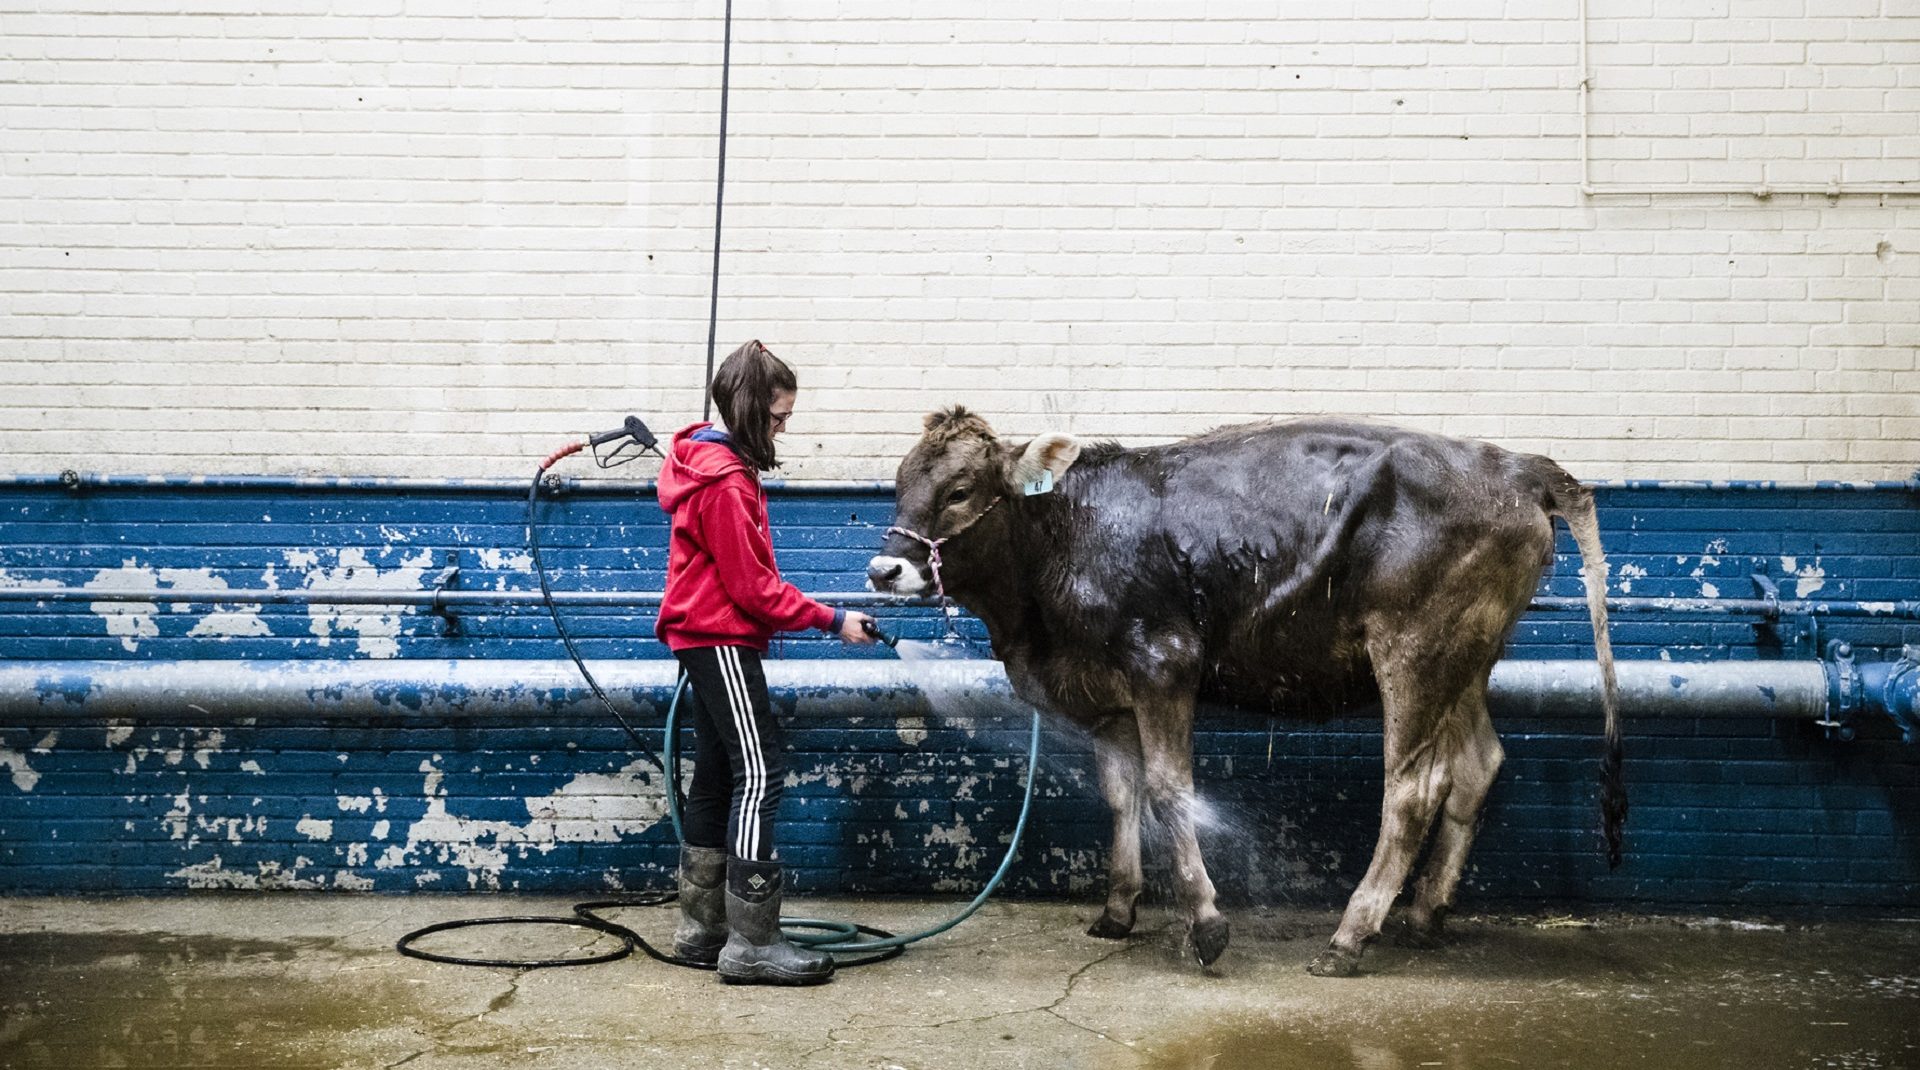 Kristin Shaffer, 12, of Port Trevorton, Pa., cleans her brown Swiss dairy cow during the 103rd Pennsylvania Farm Show in Harrisburg, Pa., Wednesday, Jan. 9, 2019.